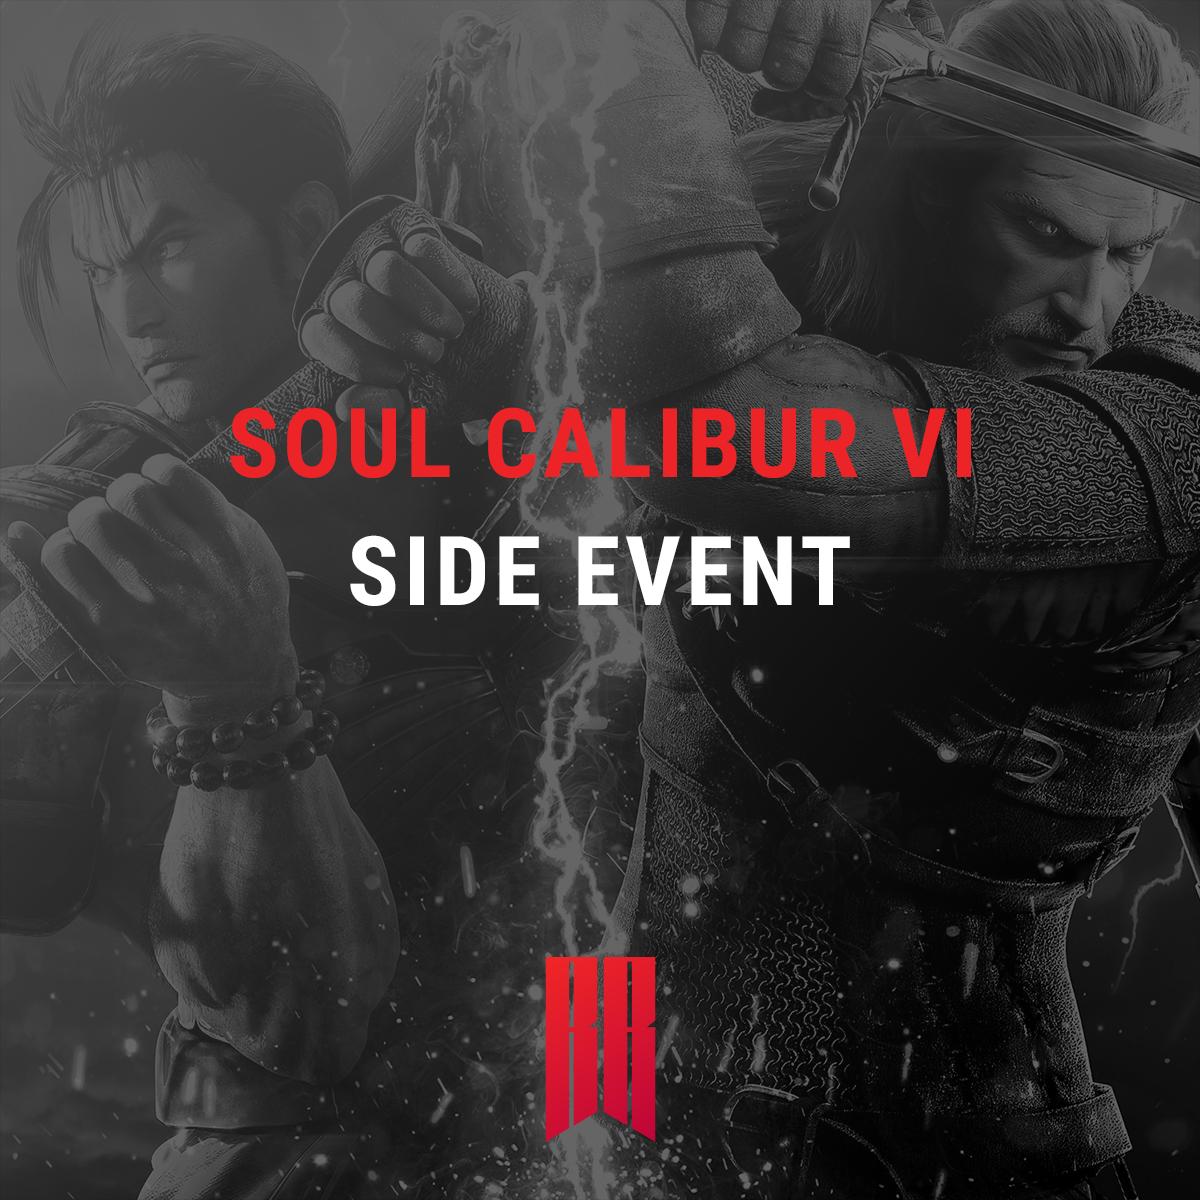 More Side events?! There's never too much of those! 

Meet SCVI Side Event during 2nd day of Russian REVersal.
Registration is available: https://t.co/5JQlz5Igov

Russian REVersal is a Moscow major FG tournament happening this week. https://t.co/l8JXtzCOVc